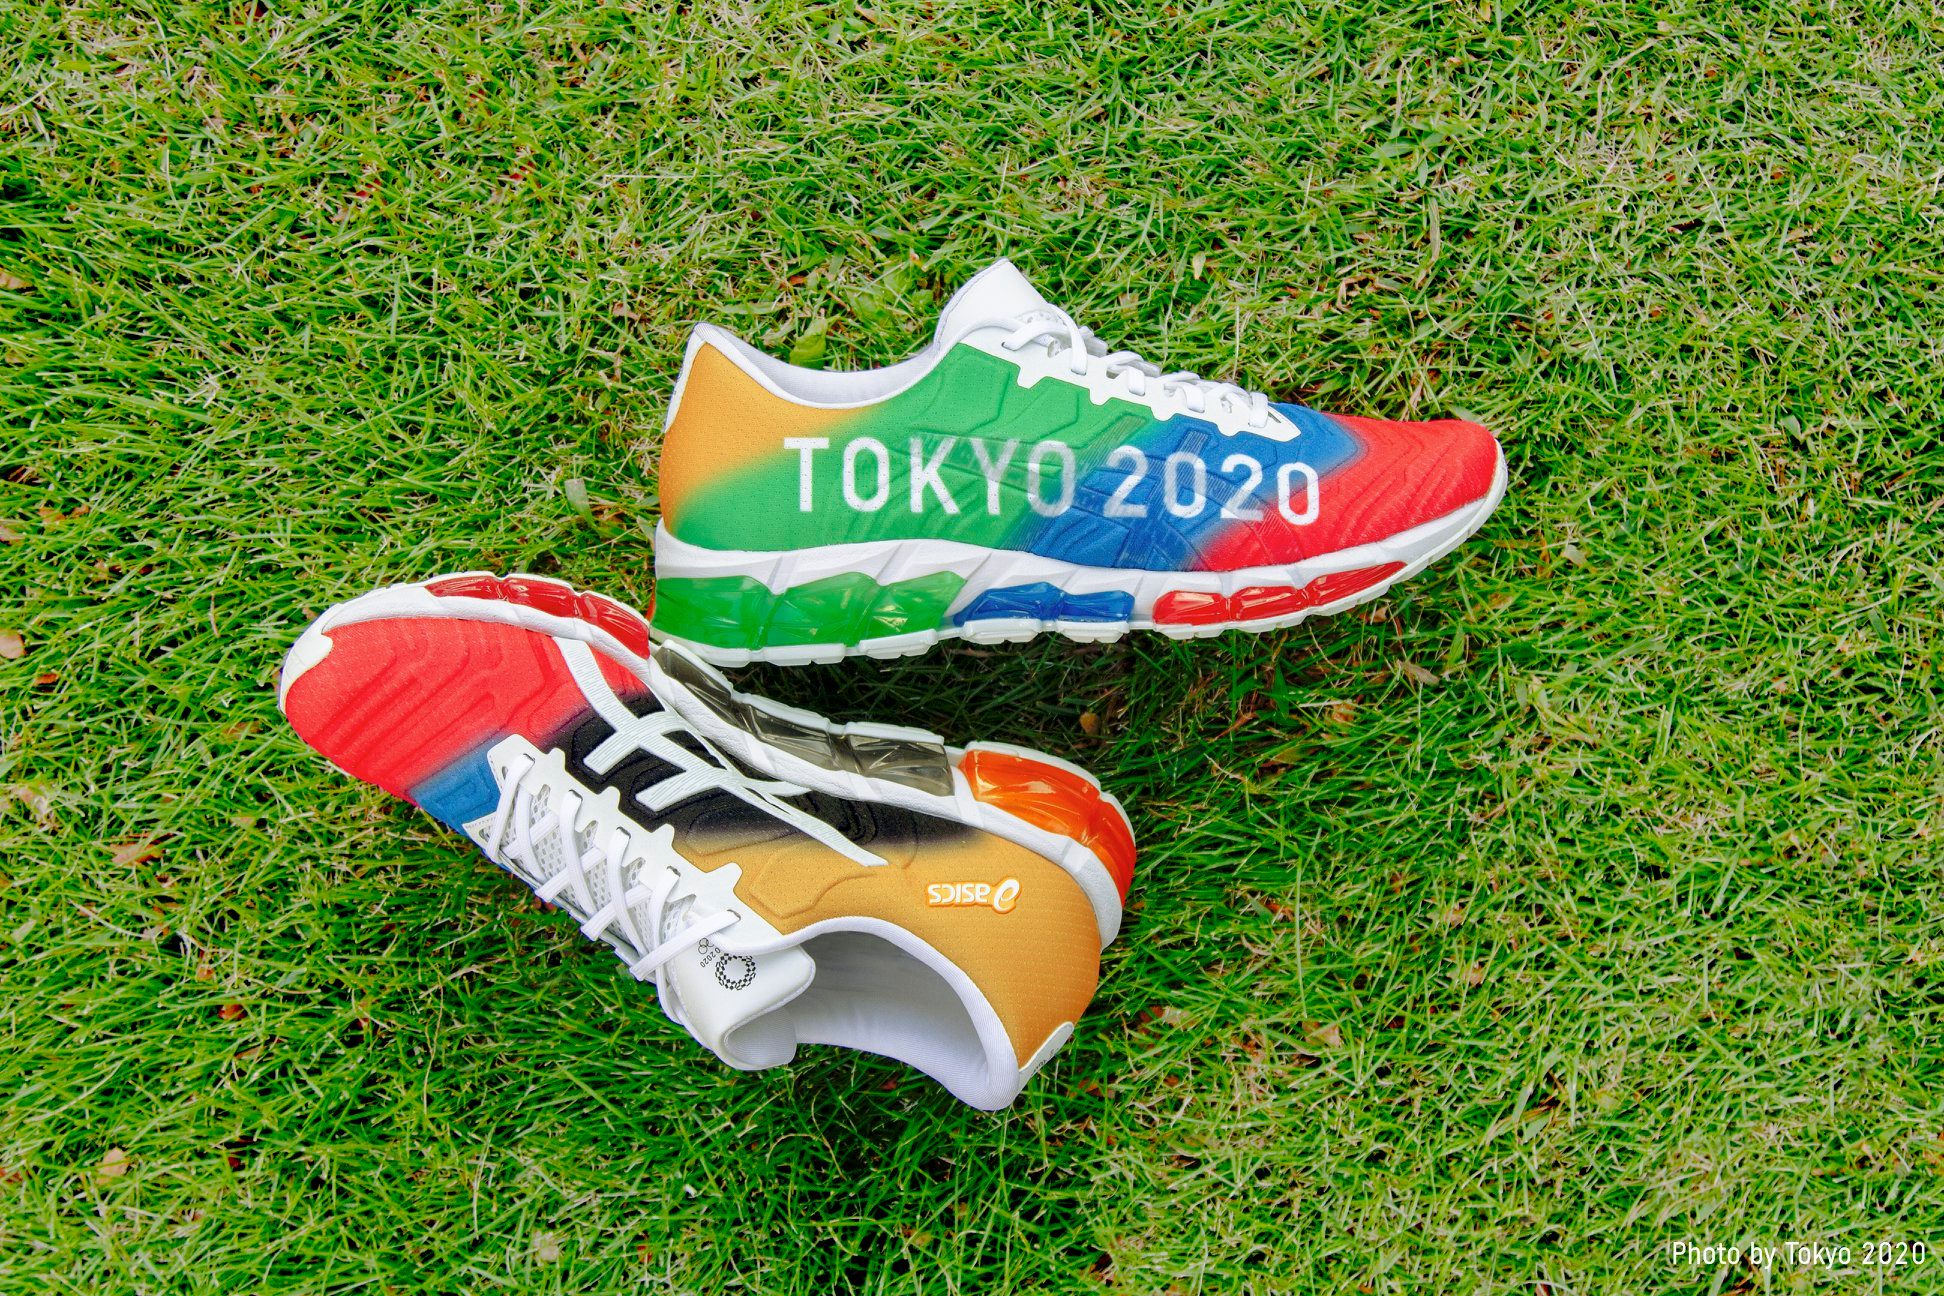 New guidelines prohibit acts of protest at the Tokyo Olympics